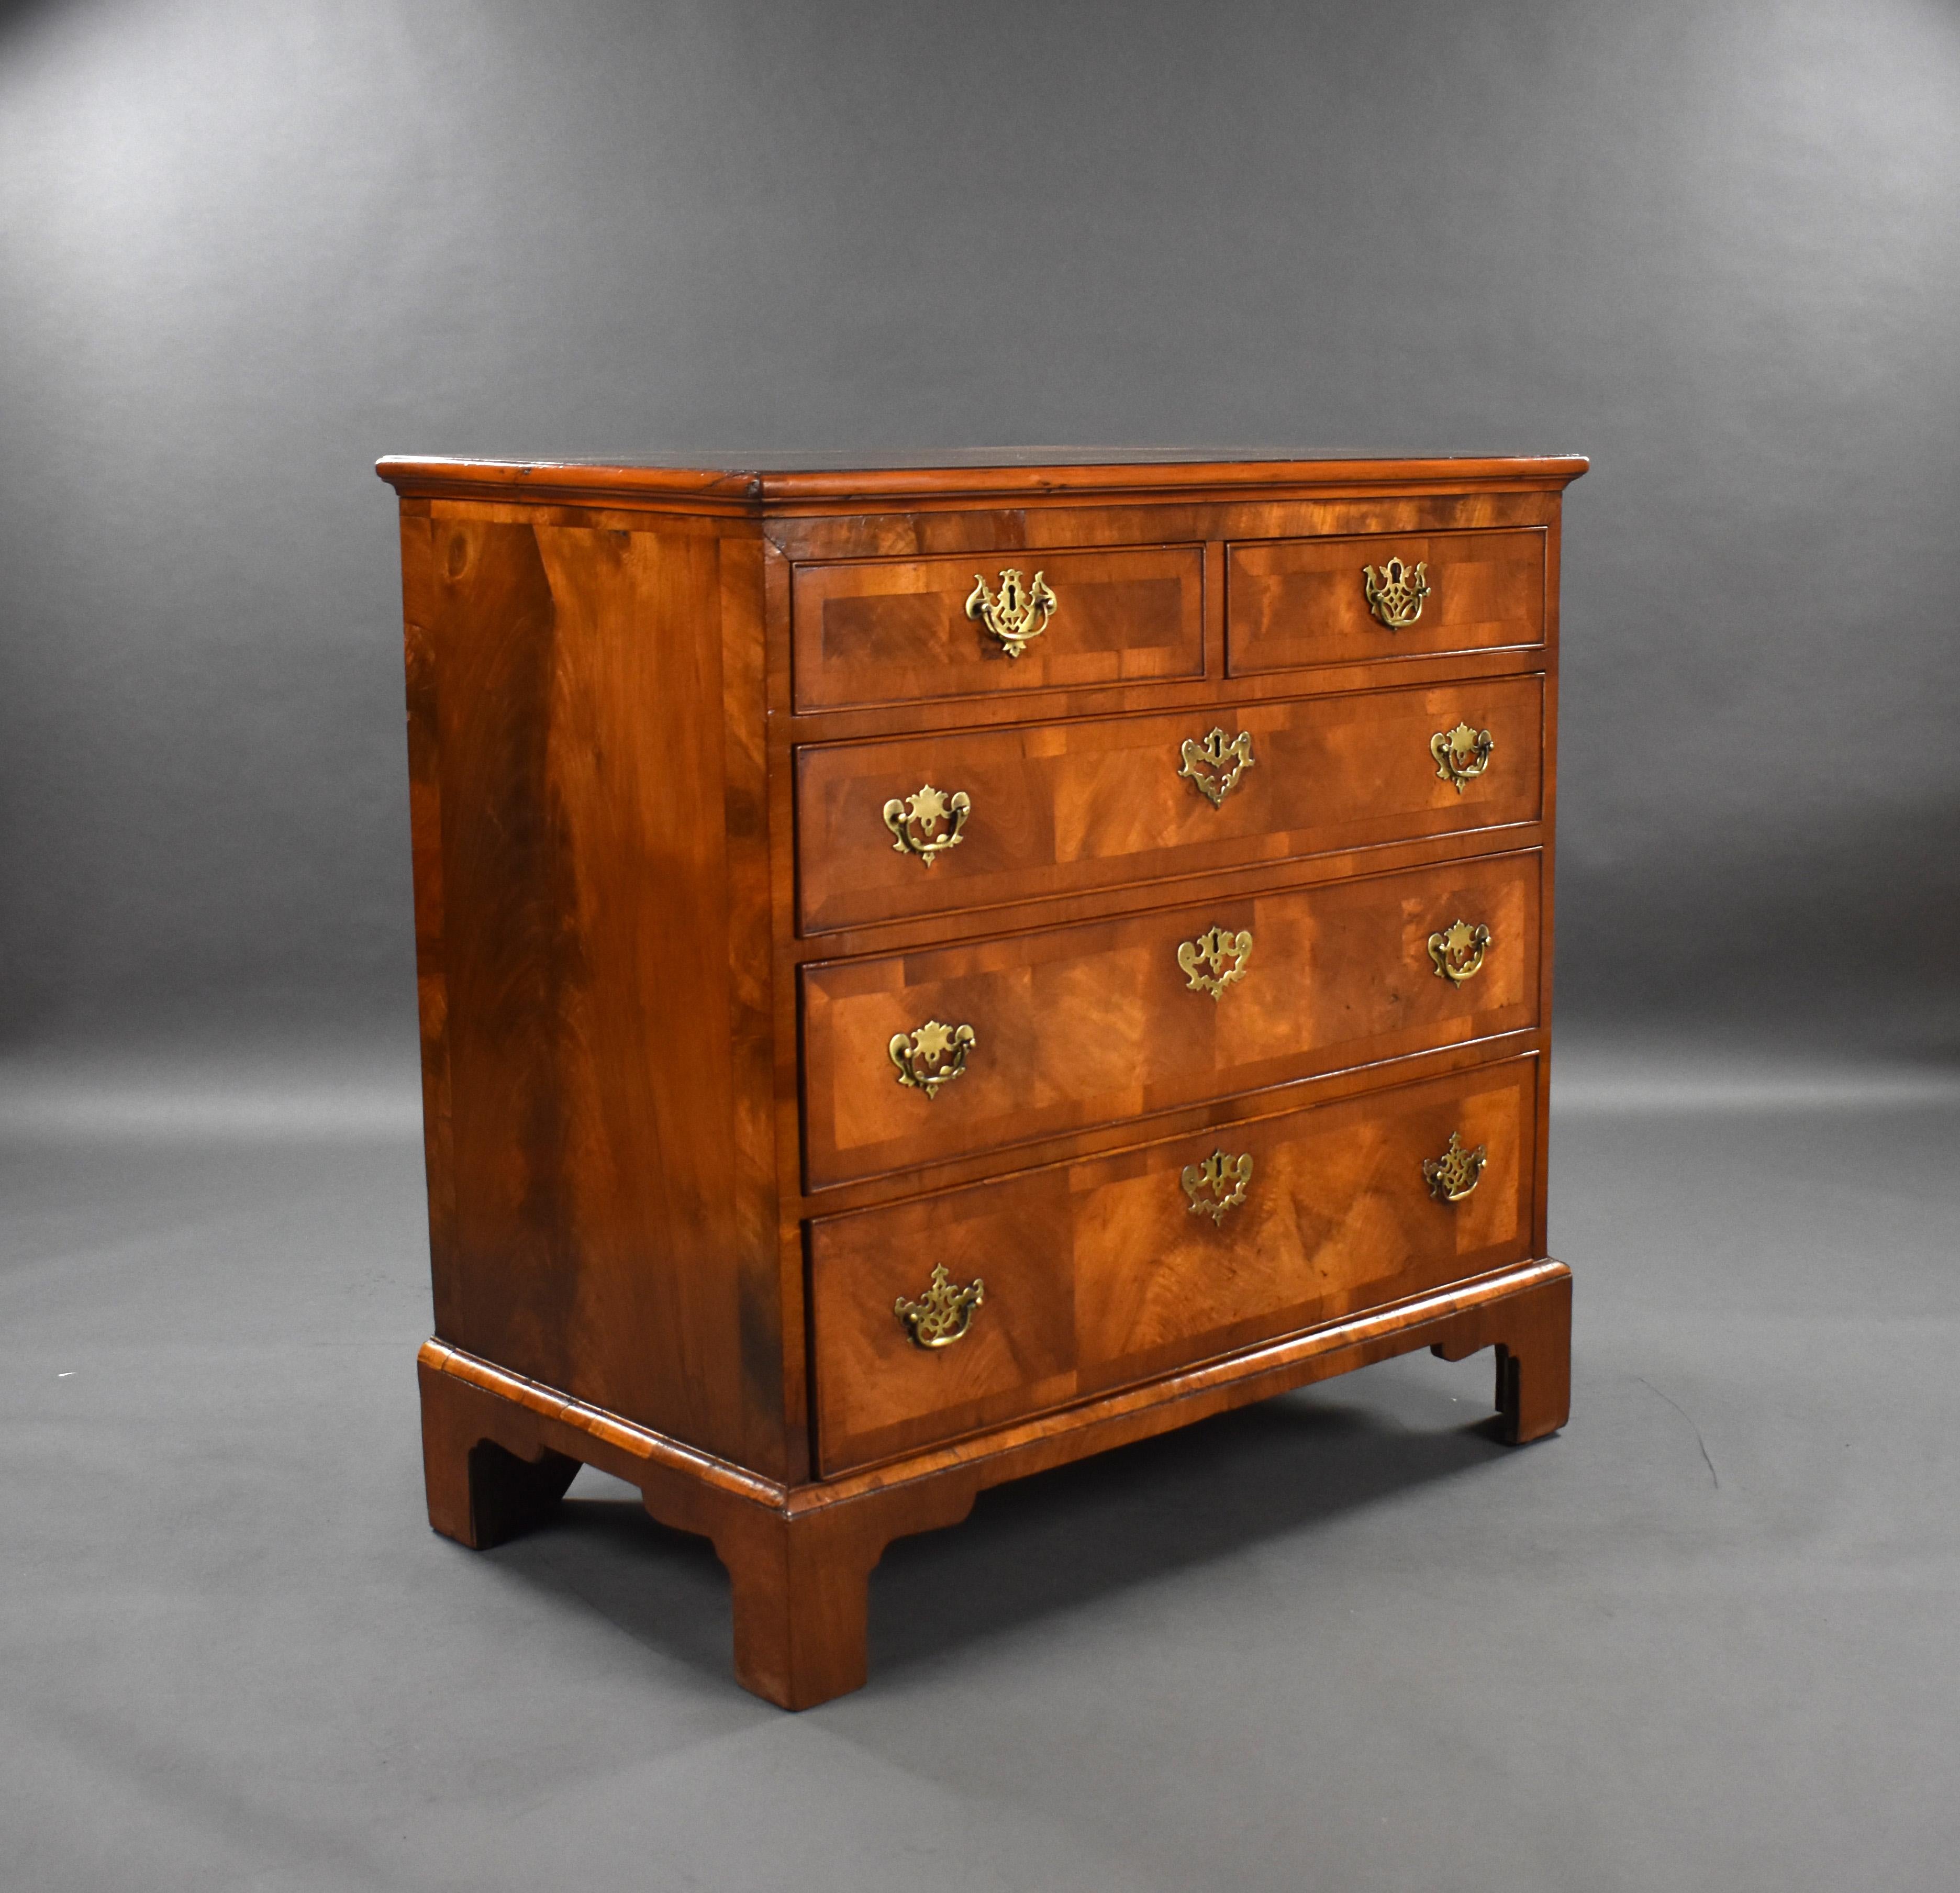 For sale is a good quality George I walnut chest of drawers, having an arrangement of five drawers, two short over three long graduated drawers, each cross banded to match the top and sides. The chest stands on bracket feet and is in very good